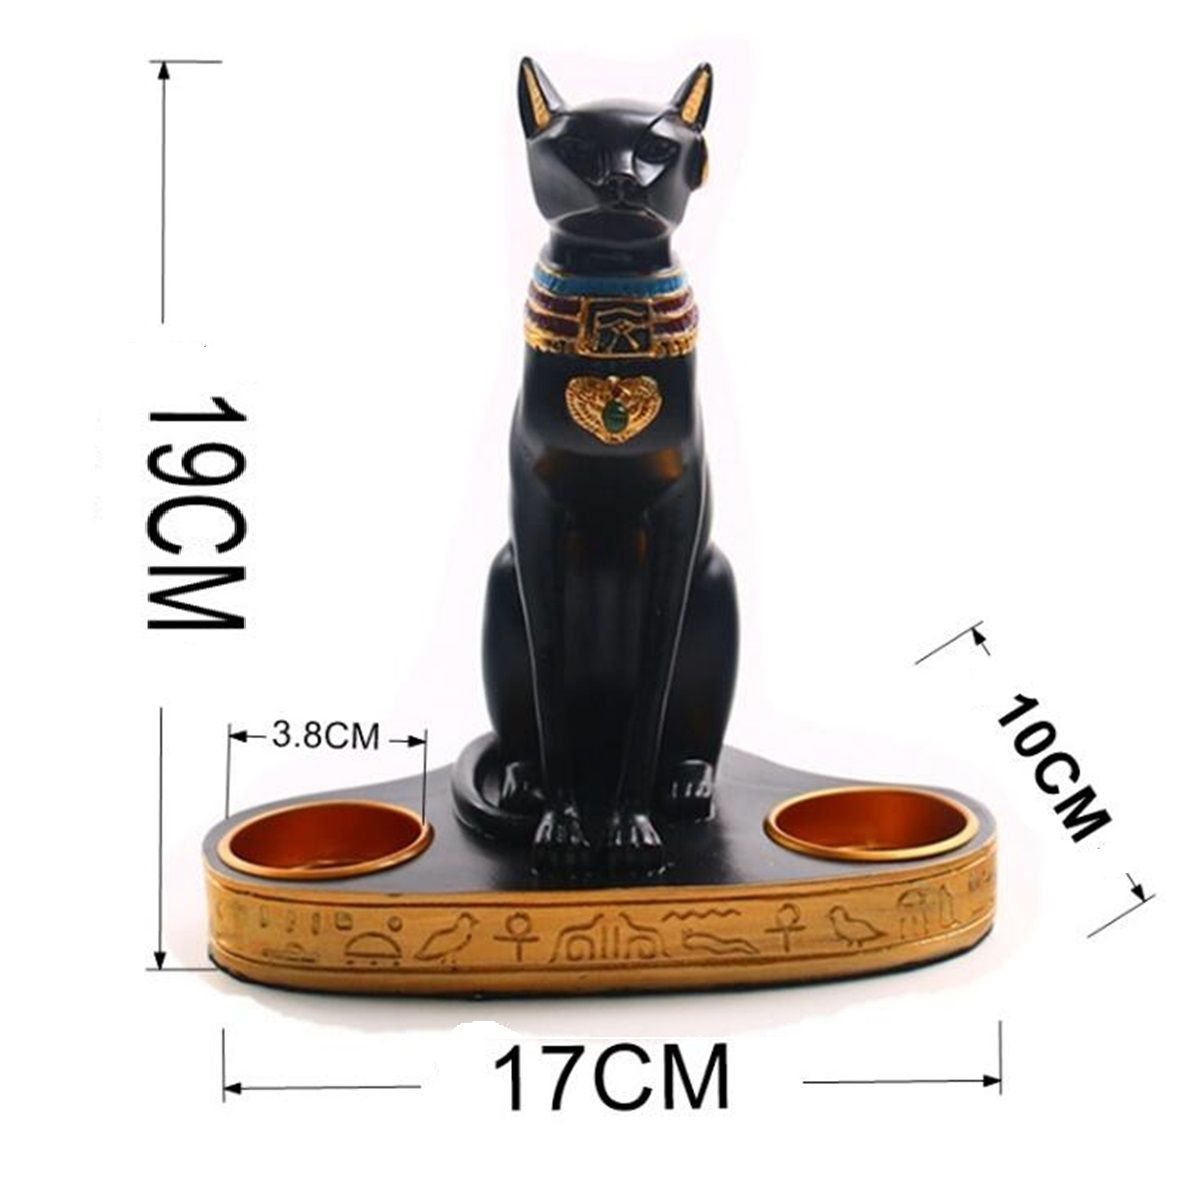 Ancient-Egypt-Bastet-Cat-Goddess-Statue-With-2-Tea-Light-Candle-Holders-Home-Room-Decorations-1520778